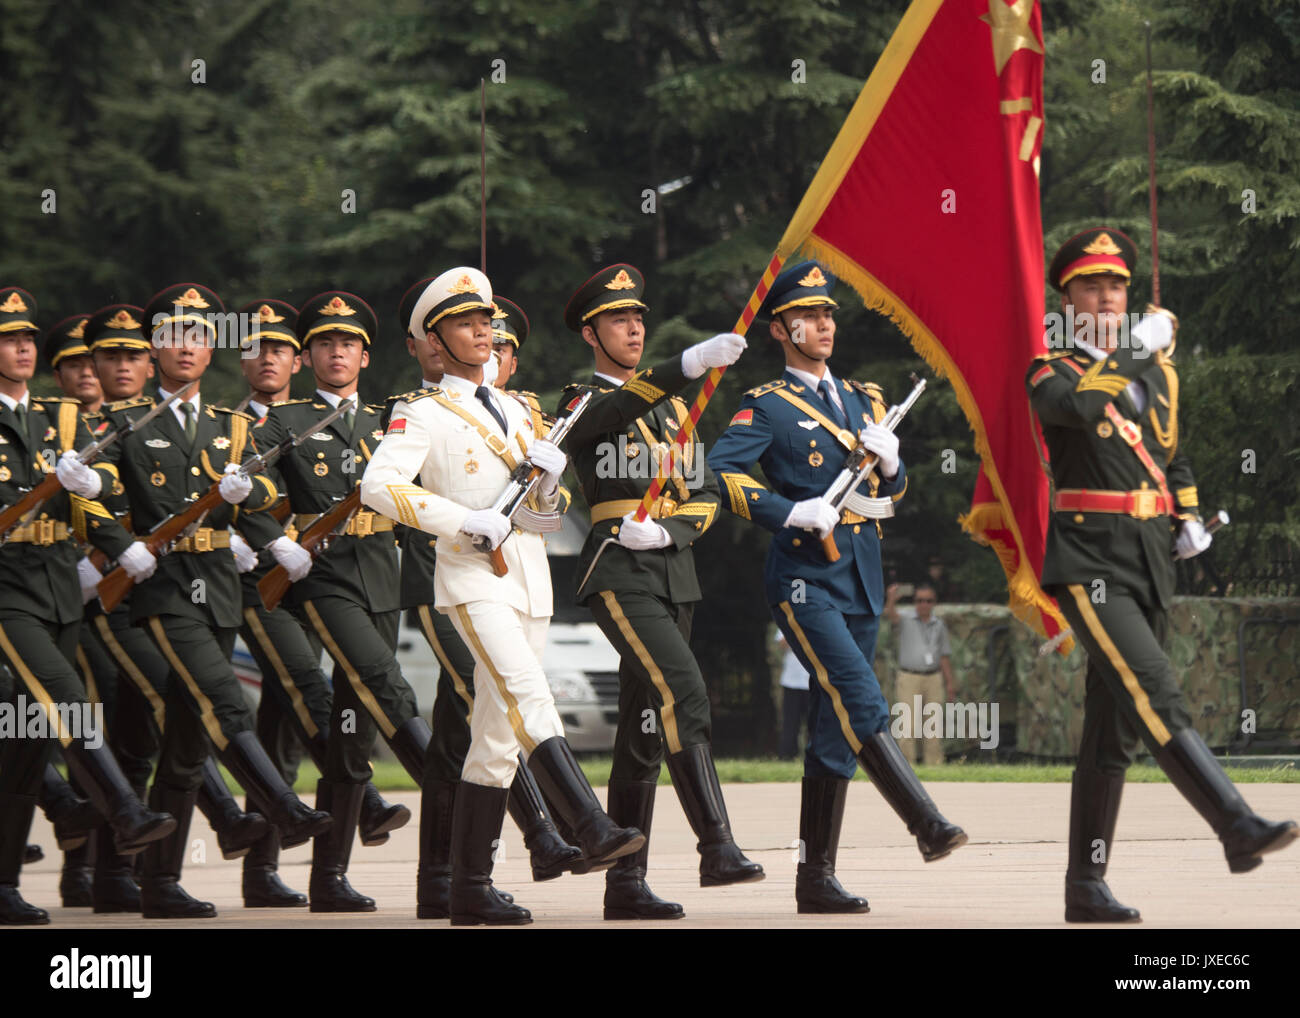 Beijing, China. 15th Aug, 2017. Chinese People's Liberation Army honor guard parade during a red carpet arrival ceremony for U.S. Chairman of the Joint Chiefs Gen. Joseph Dunford at the Bayi building August 15, 2017 in Beijing, China. Dunford is in Beijing to strengthen communication between the two militaries amid tensions concerning North Korea. Credit: Planetpix/Alamy Live News Stock Photo